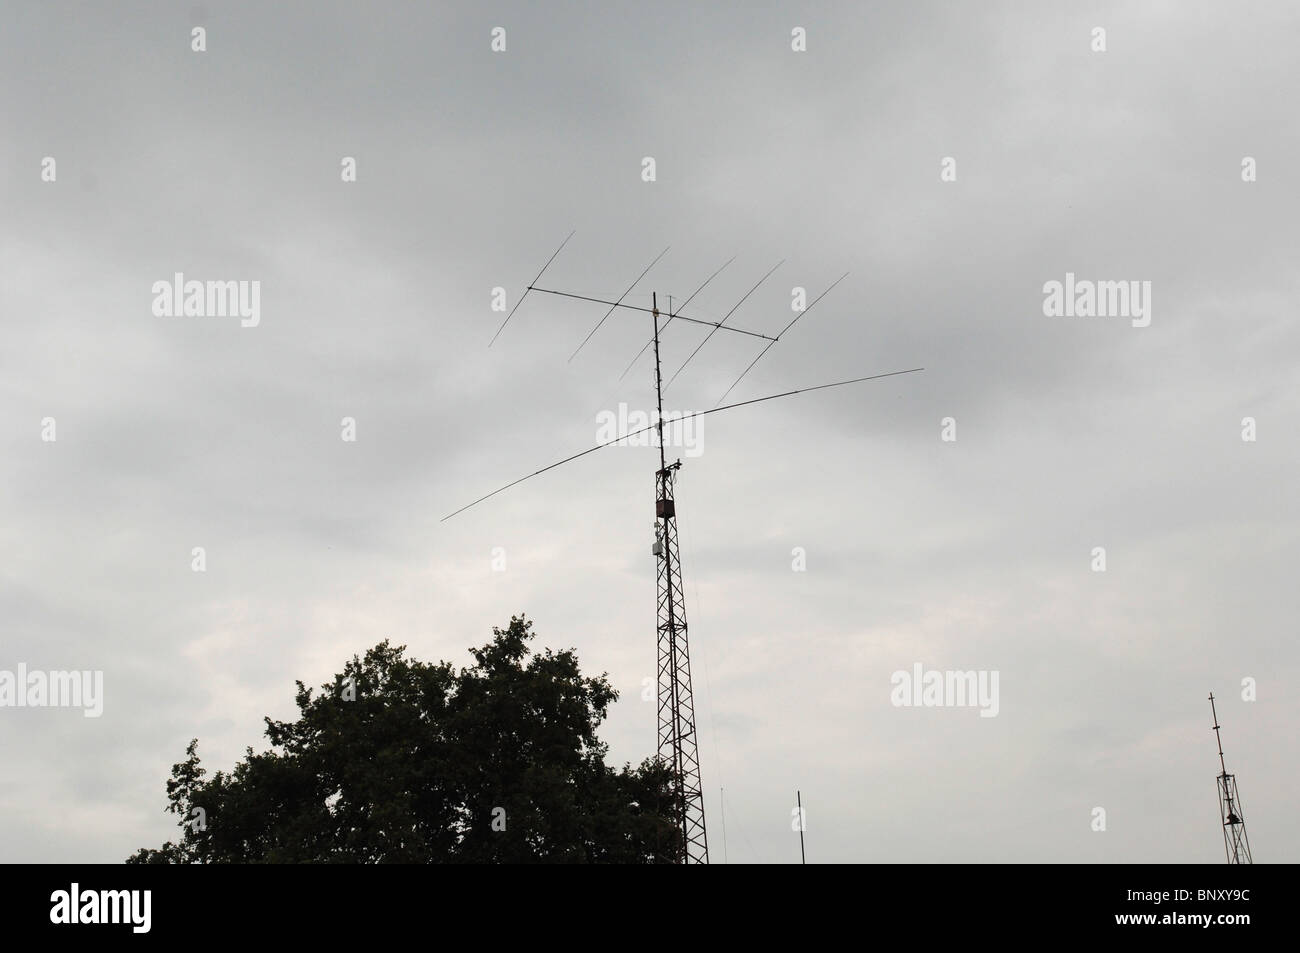 Large shortwave (HF, amateur radio, or government) antenna installation in Europe. Stock Photo